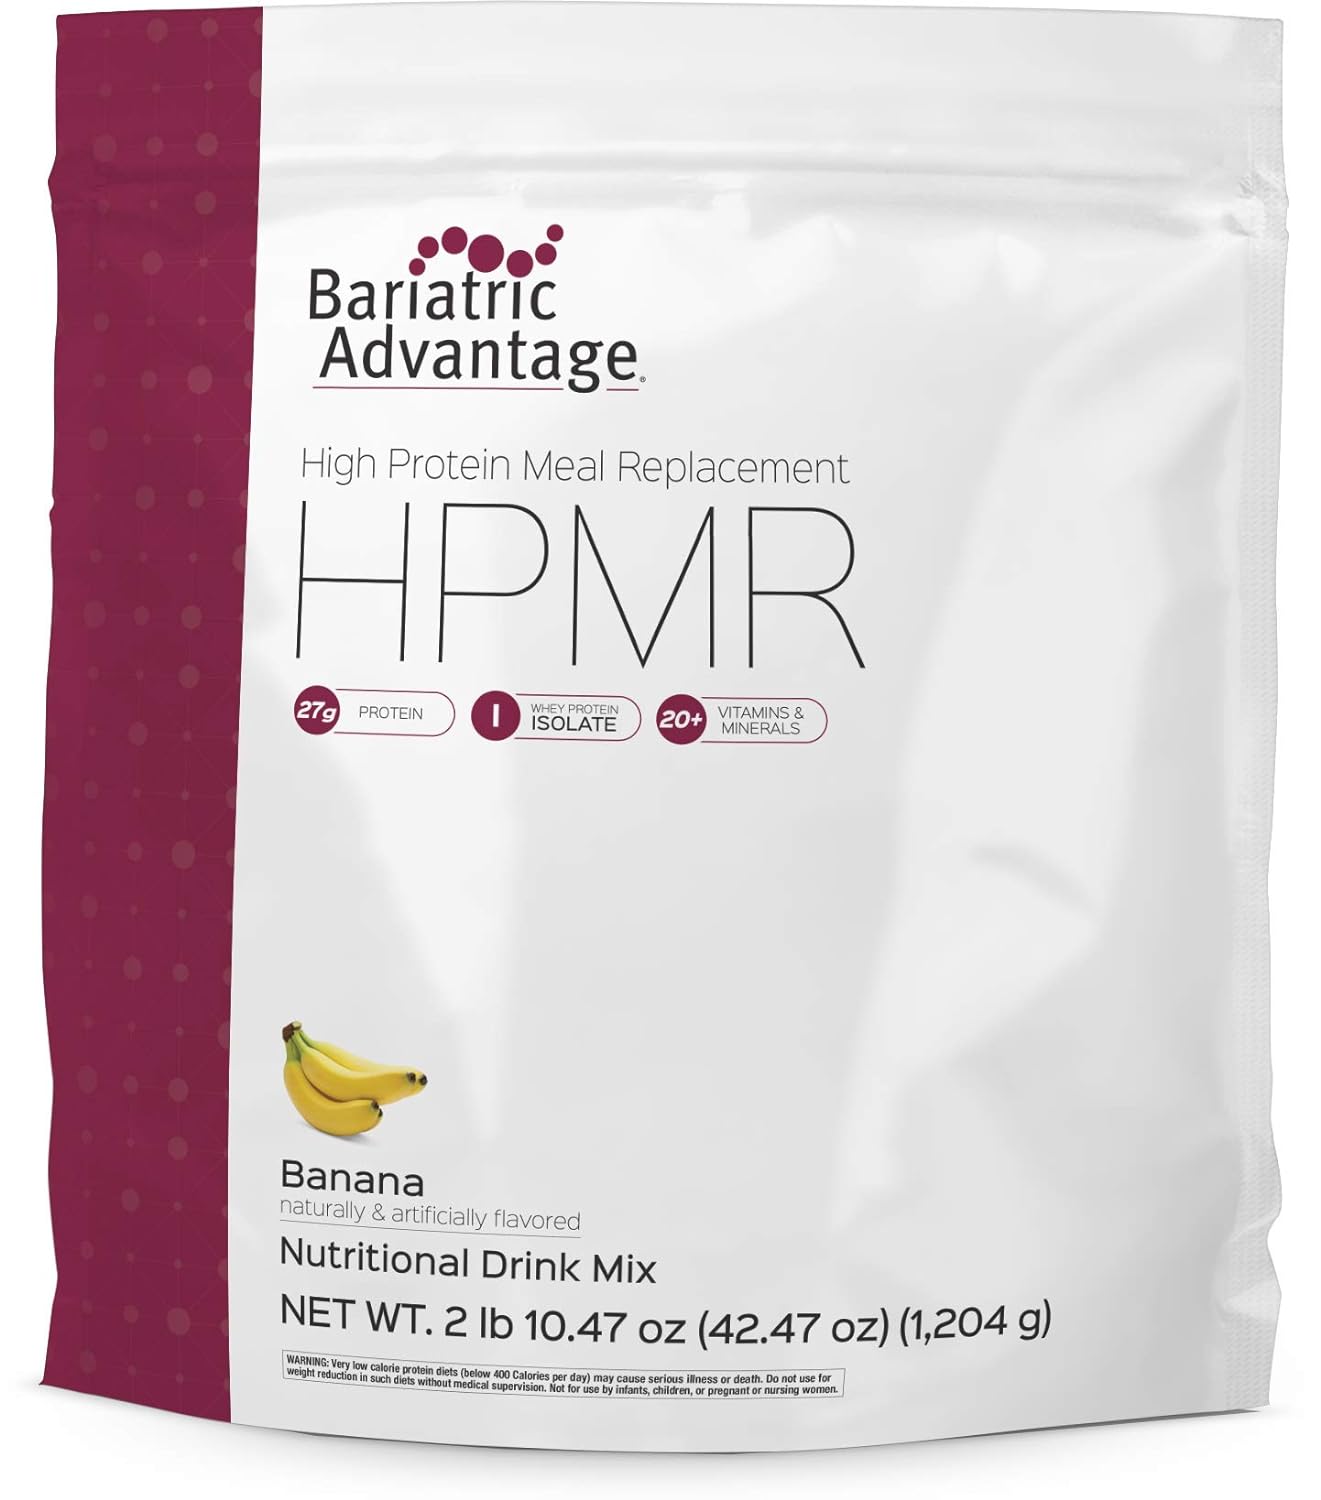 Bariatric Advantage High Protein Meal Replacement Drink Mix, Protein Powder Whey Isolate for Gastric Bypass and Sleeve Gastrectomy Patients (Banana)